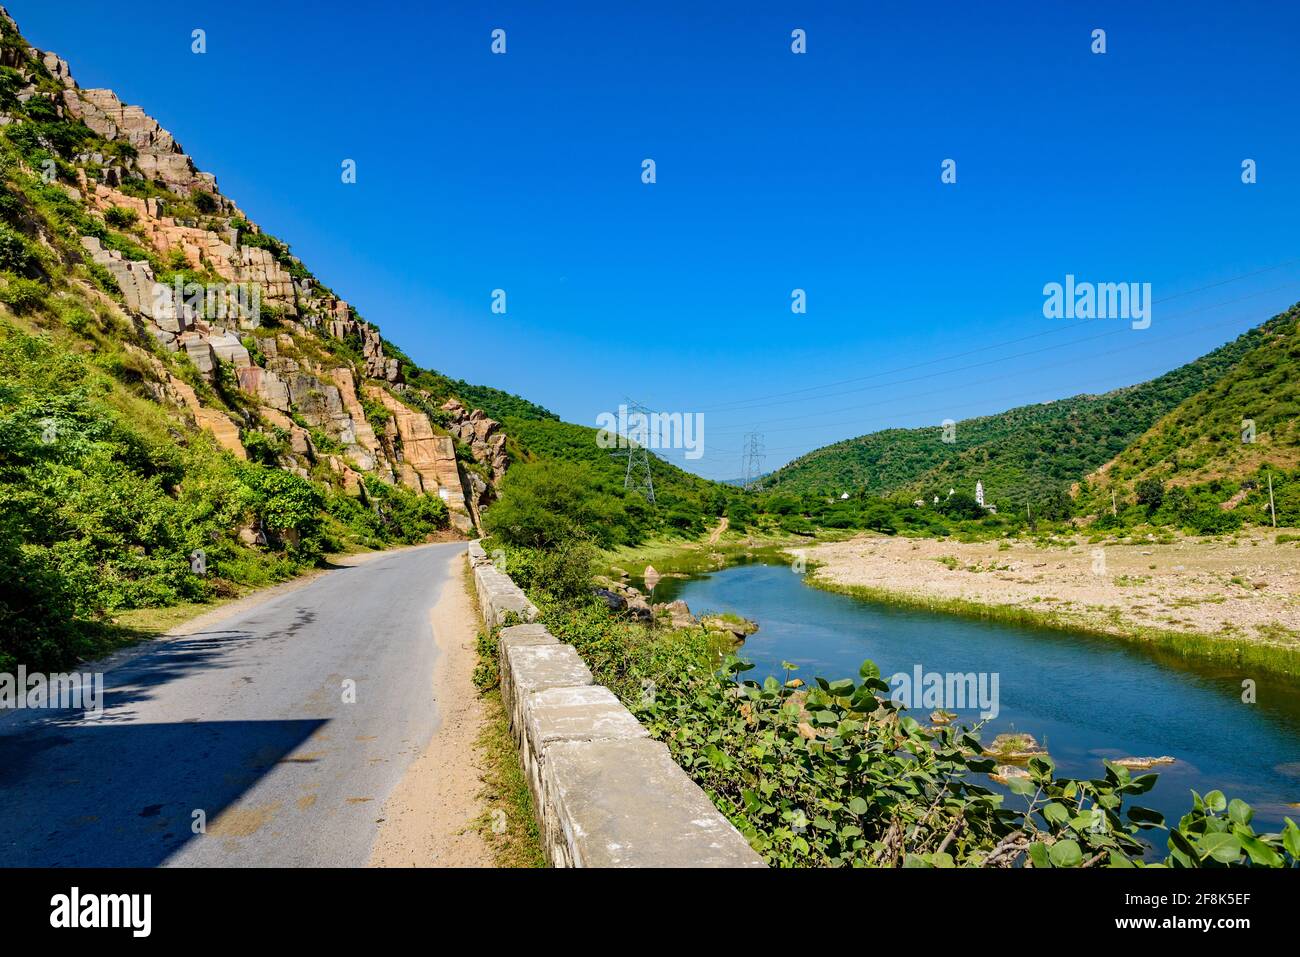 View enroute to Kumbhalgarh fort road through Rhyolite an extrusive volcanic  igneous rock mountains in Aravalli Mountains, Udaipur, Rajasthan Stock Photo